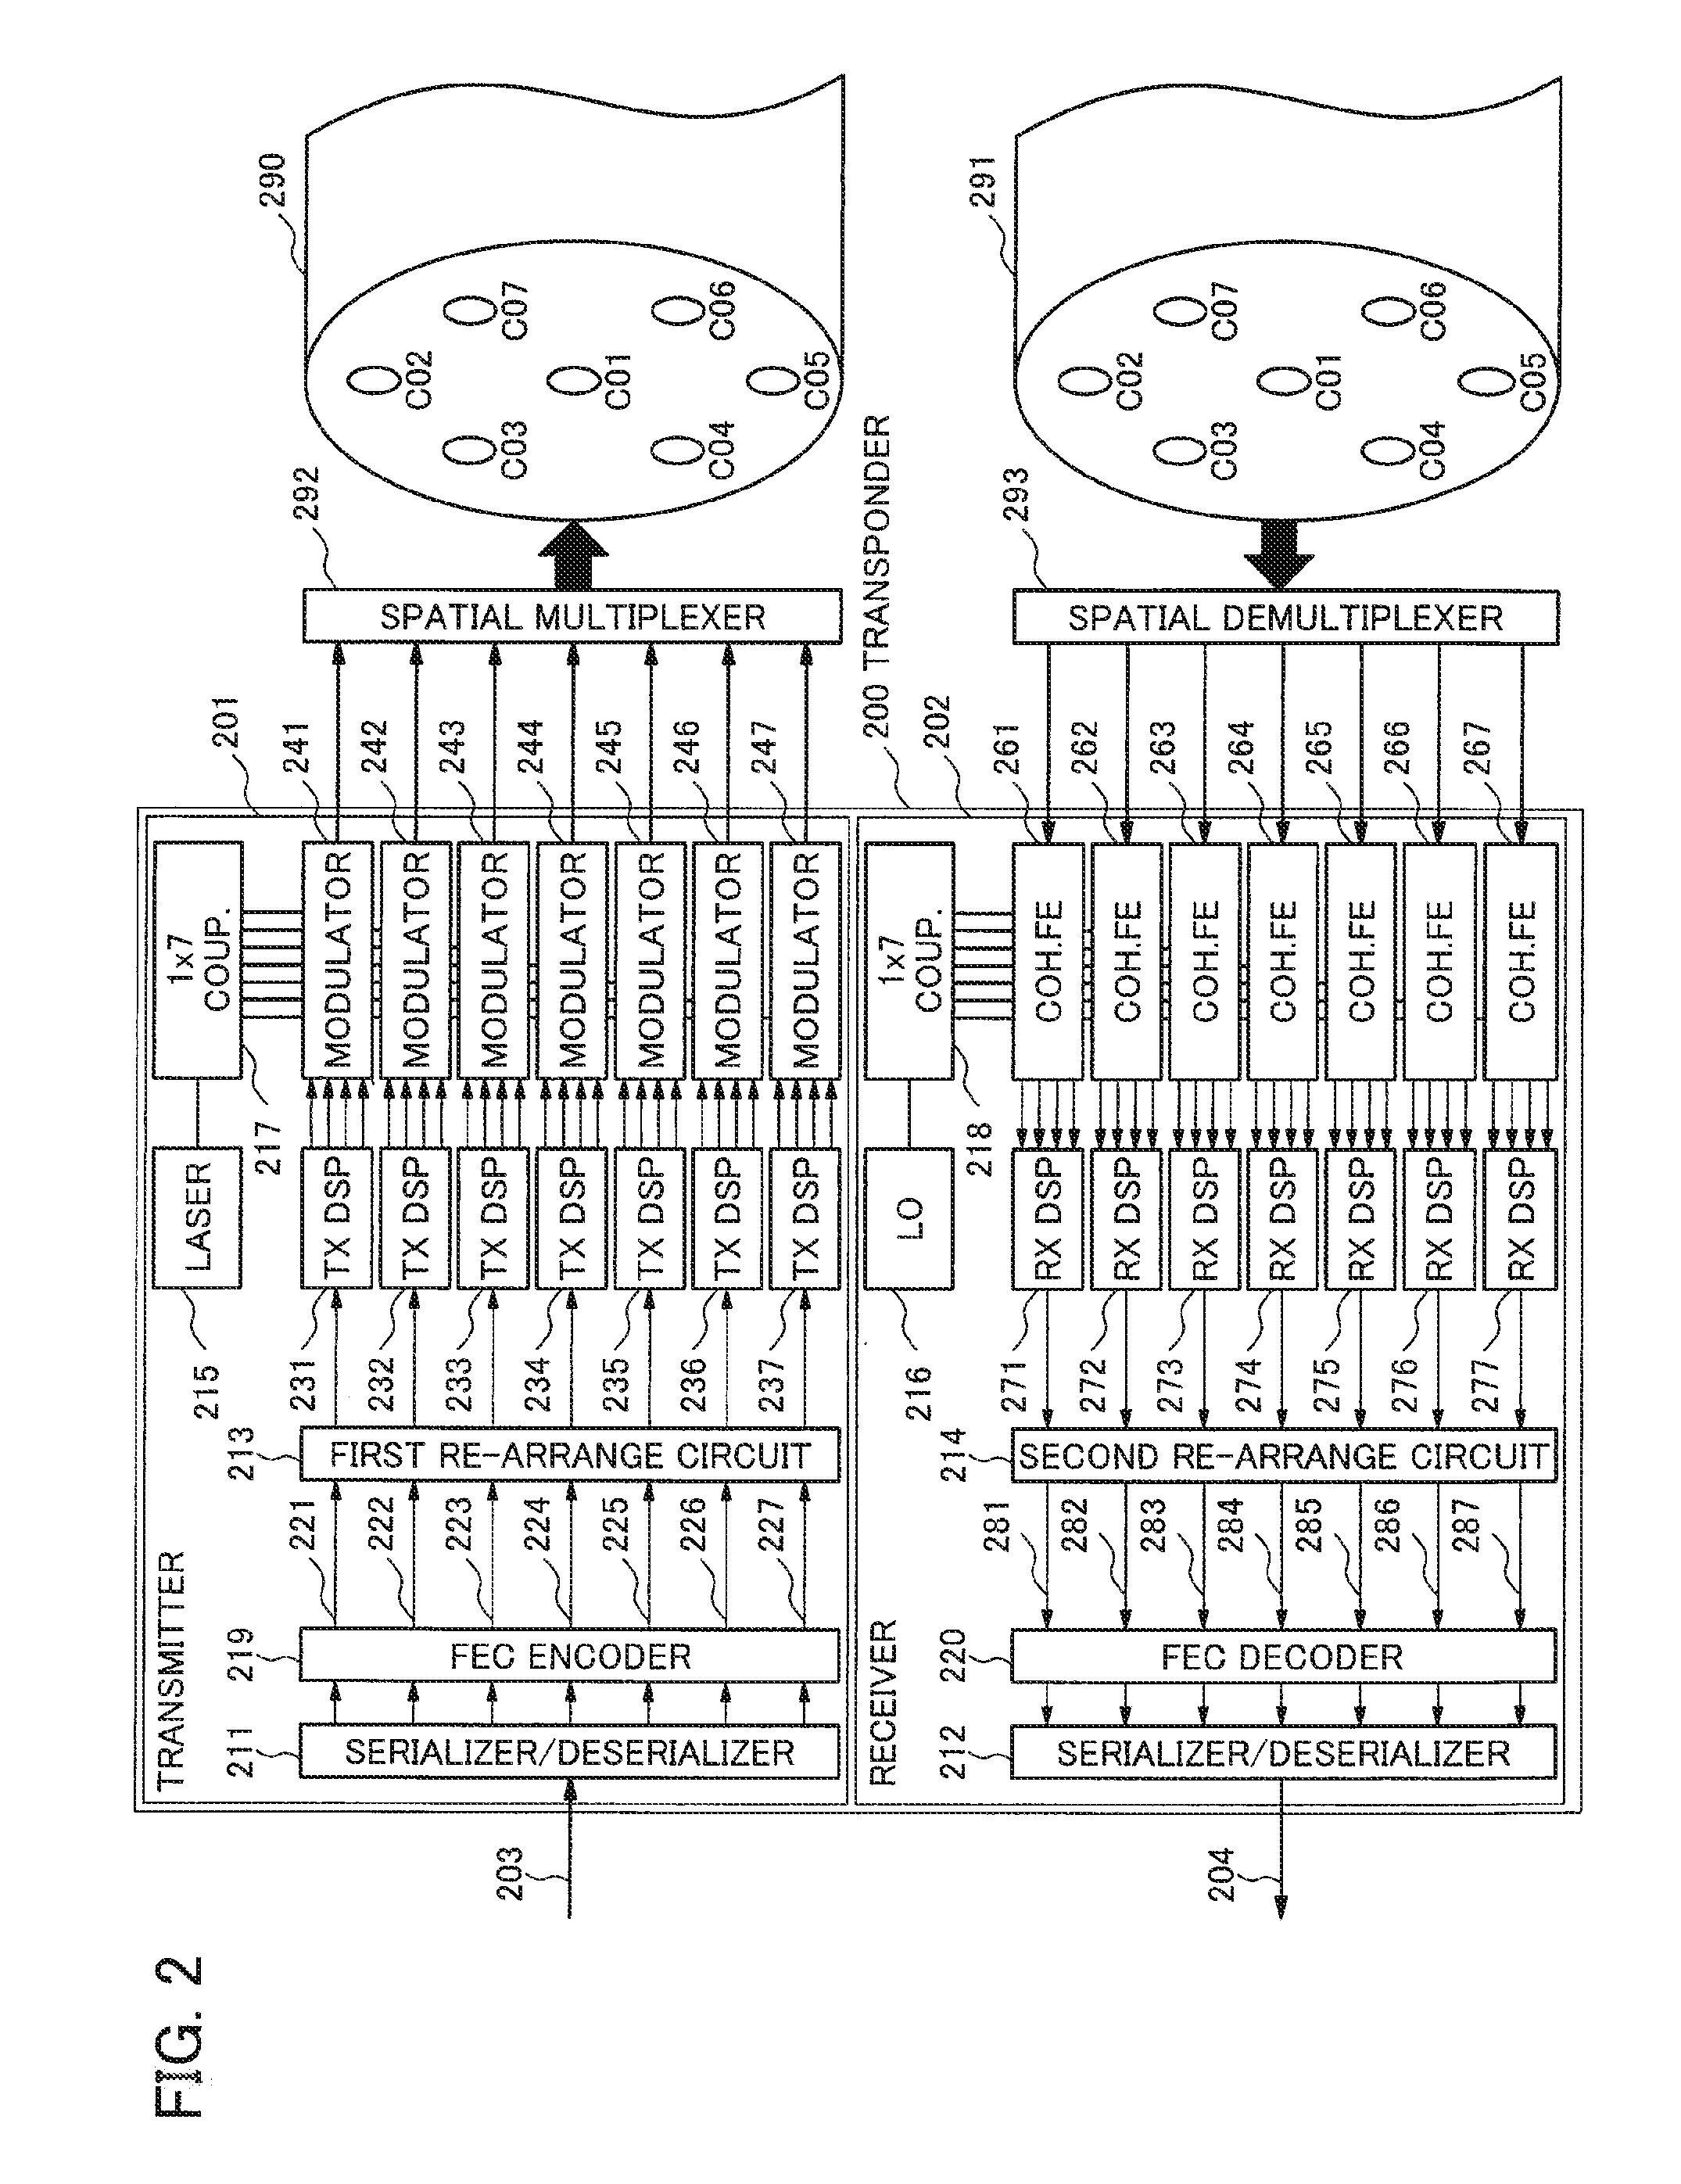 System and method for transmitting optical signal over multiple channels